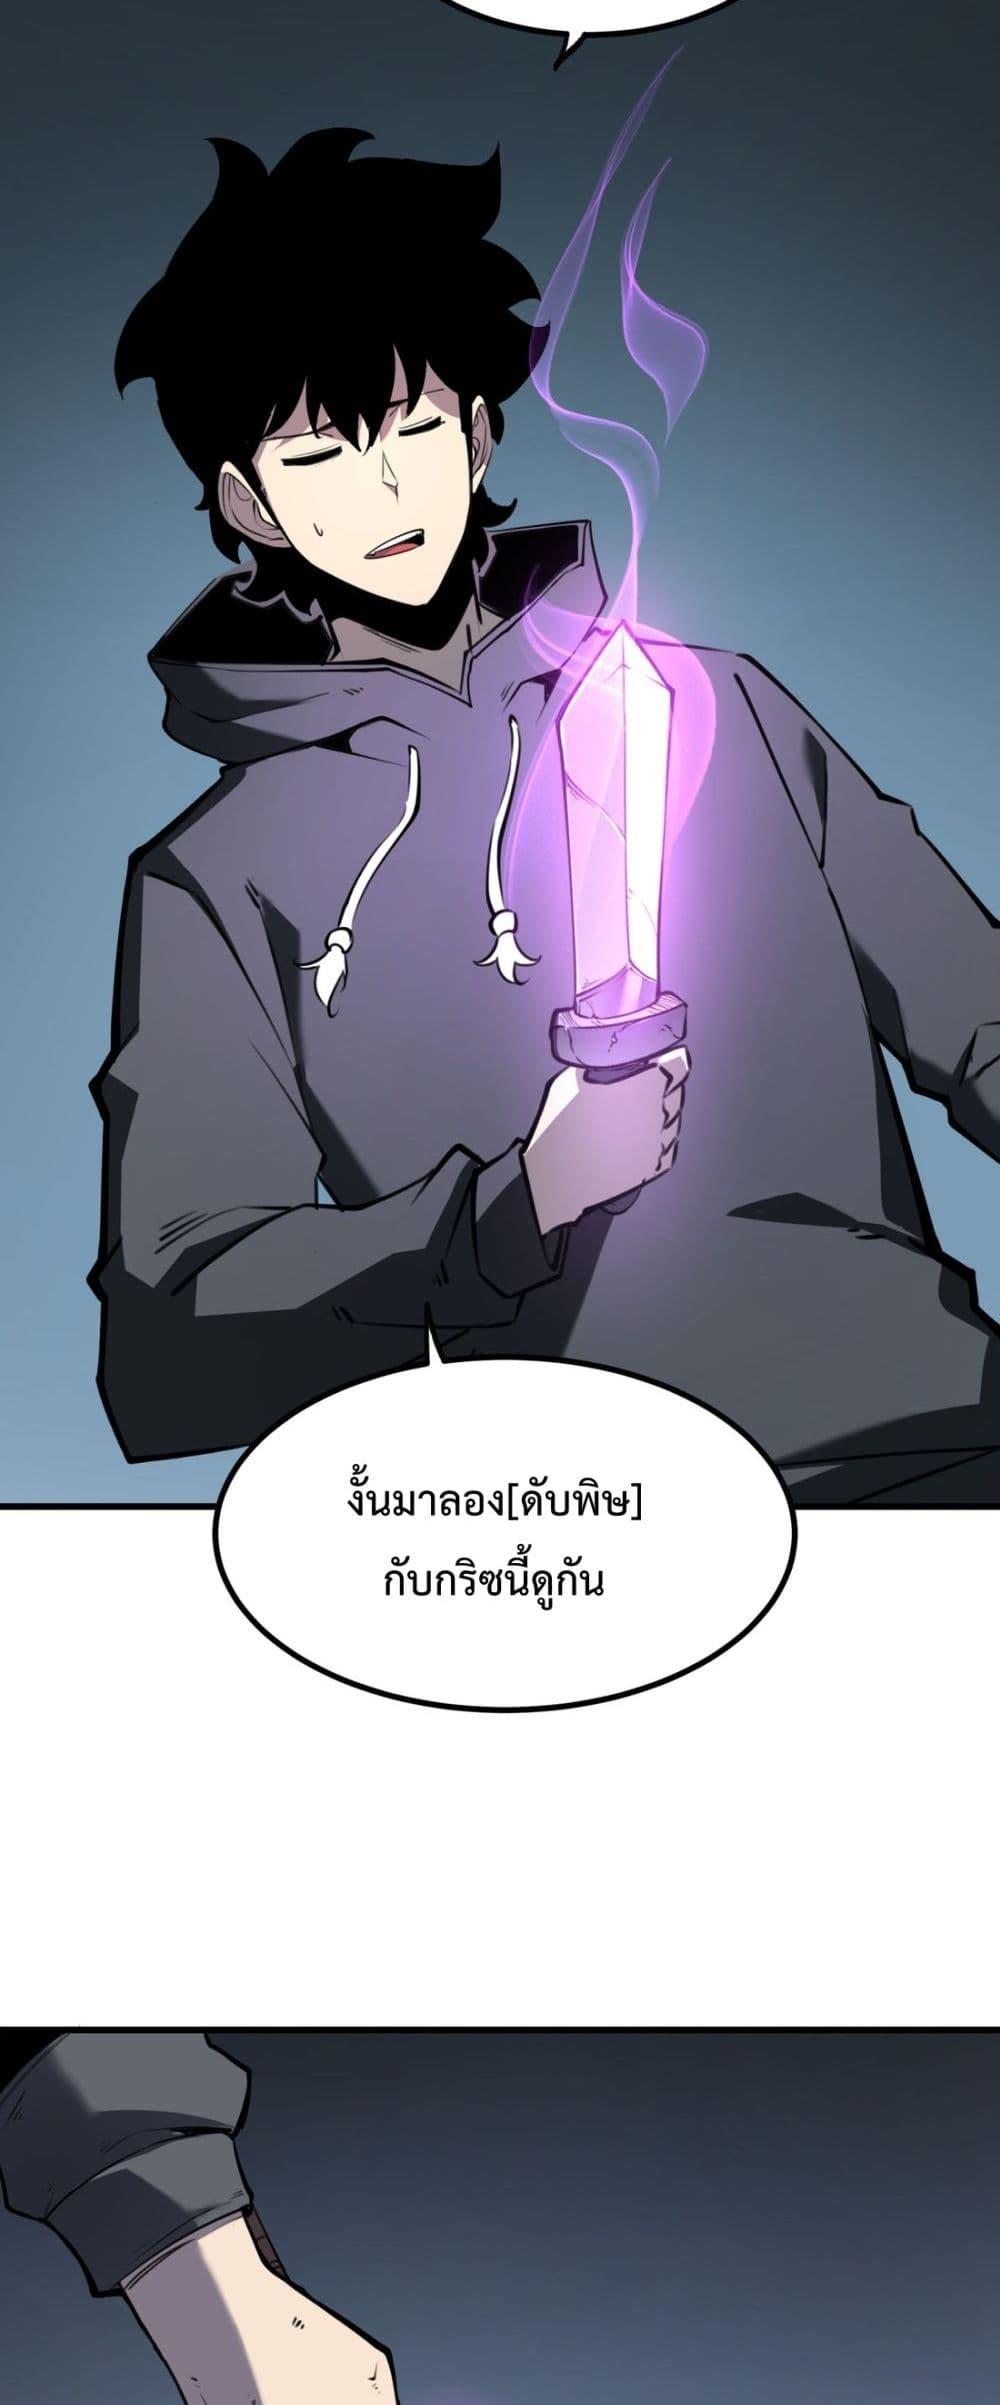 I Became The King by Scavenging โ€“ เนเธเนเธฅเน เน€เธฅเน€เธงเนเธฅเธฅเธฃเธดเนเธ เธ•เธญเธเธ—เธตเน 12 (40)